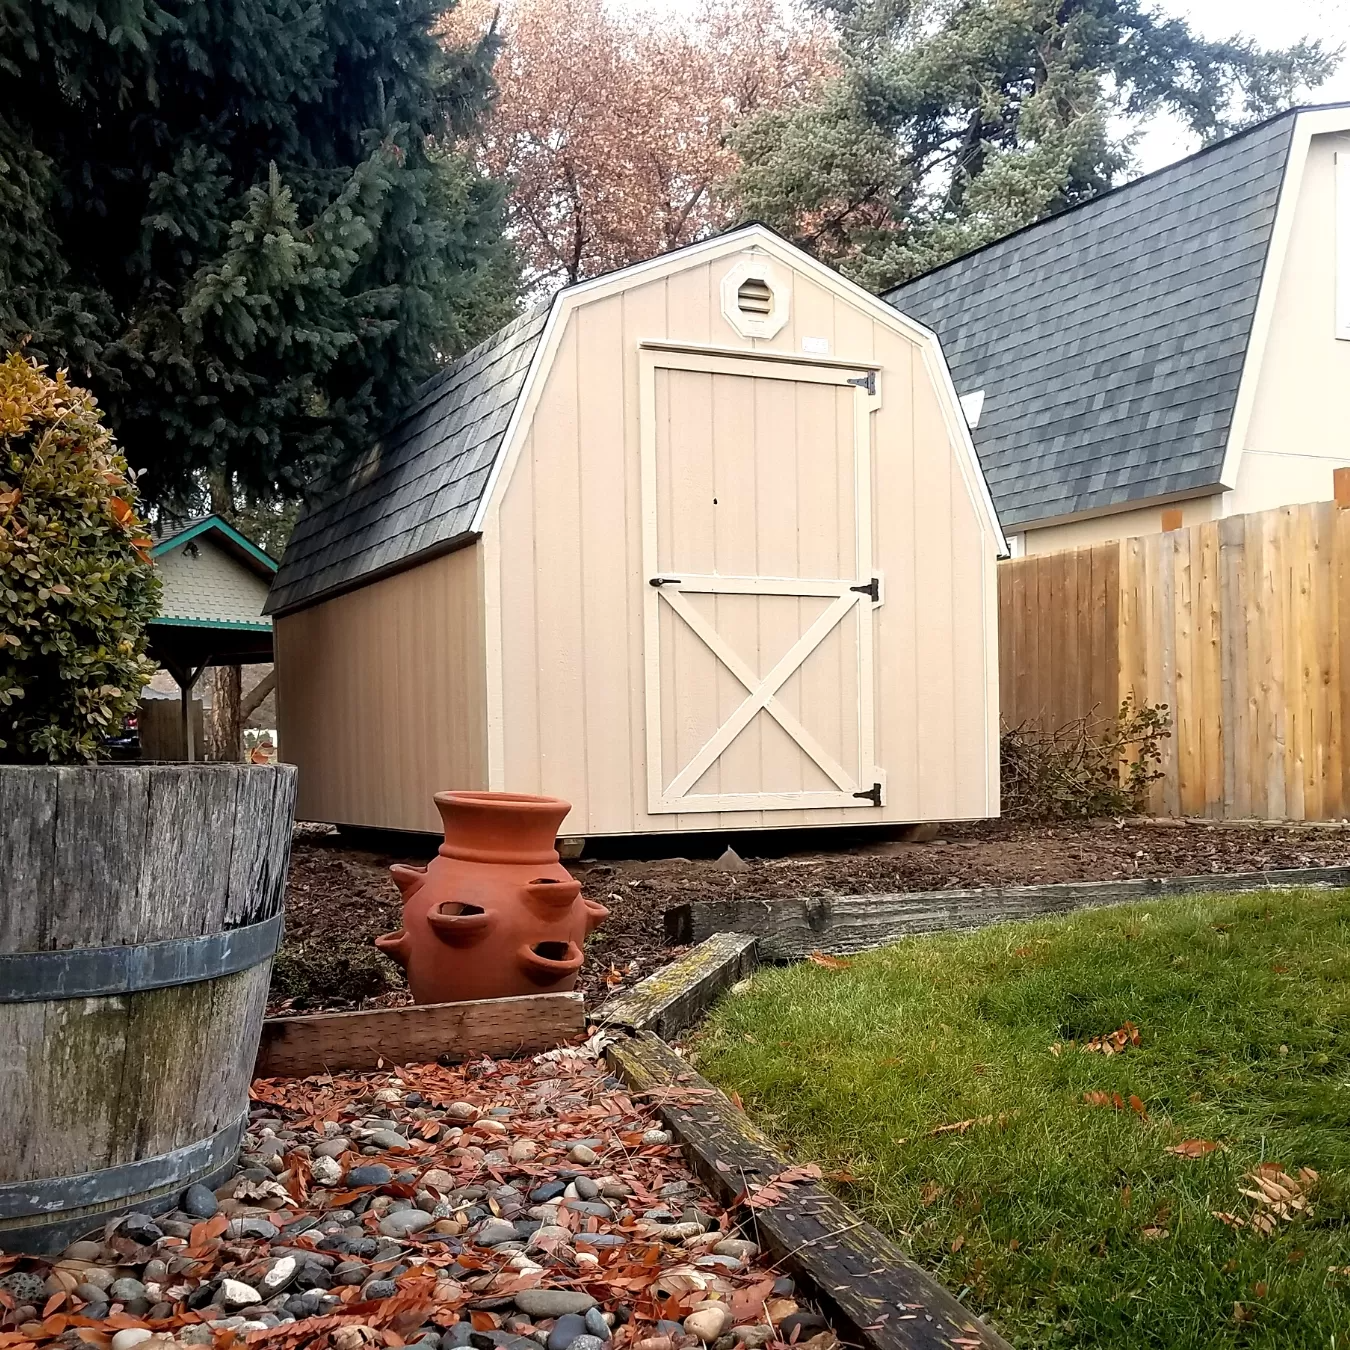 8x10 sheds for sale in oregon